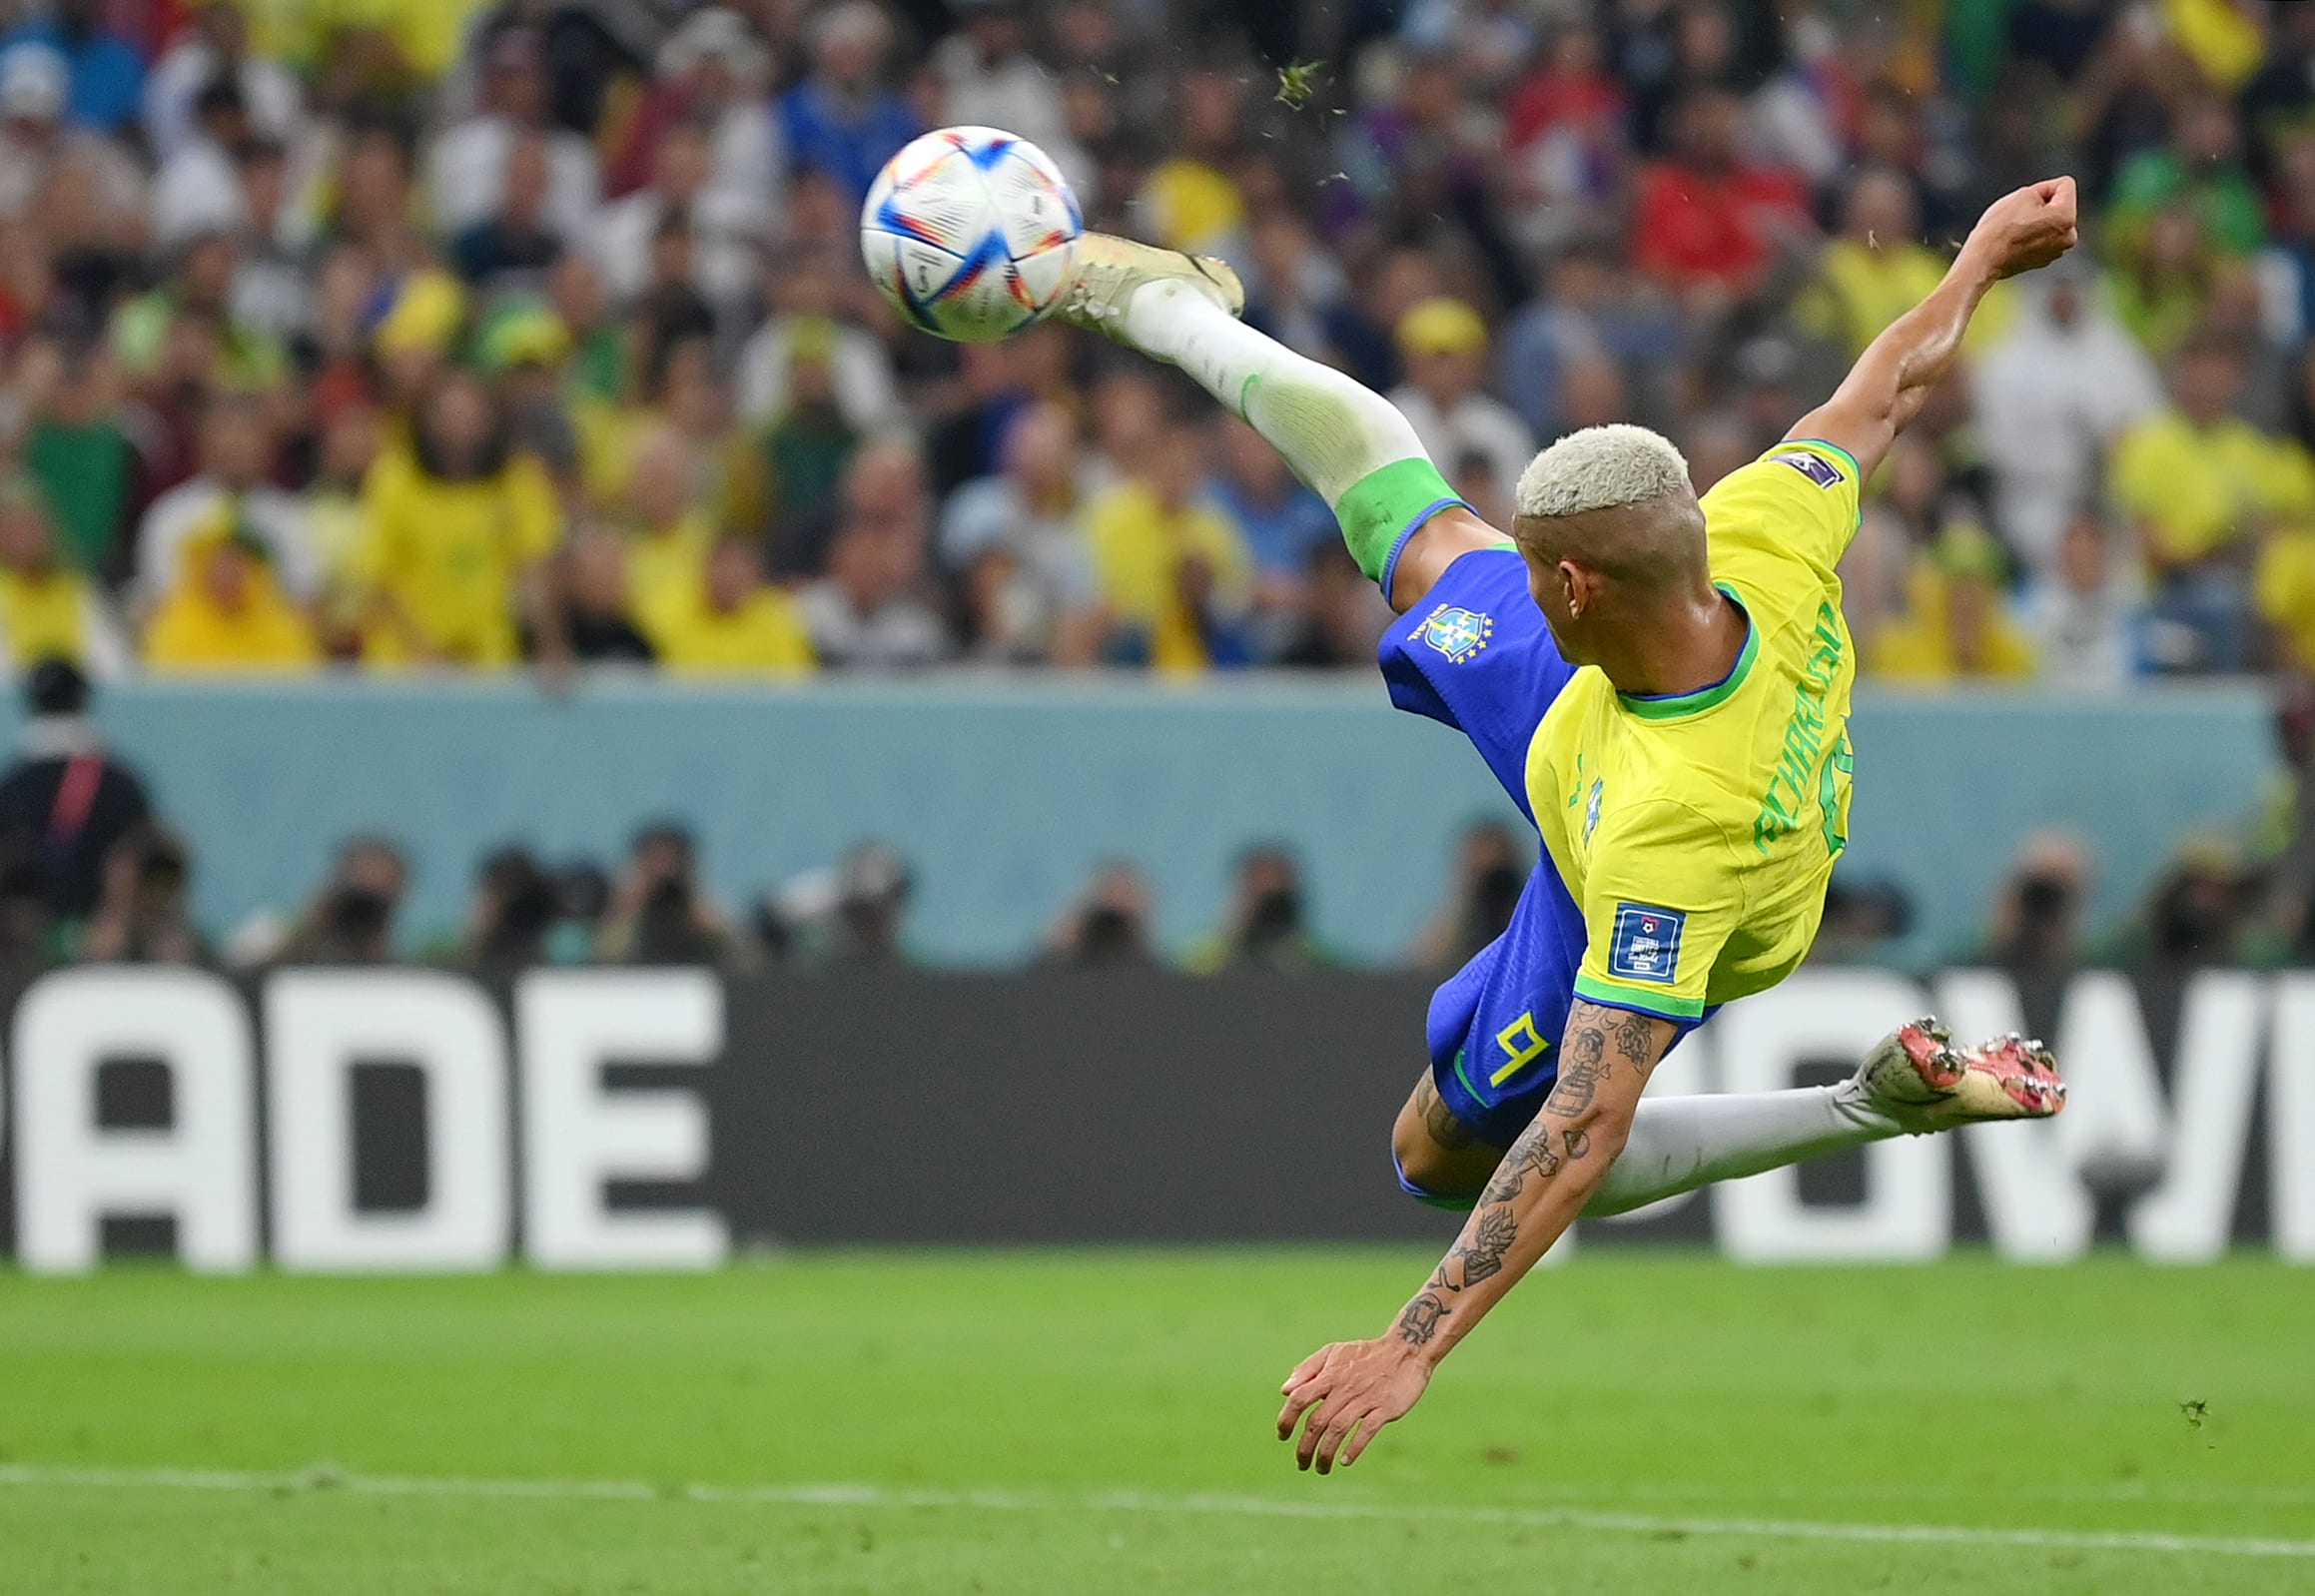 Richarlison scores at goal at the 2022 World Cup